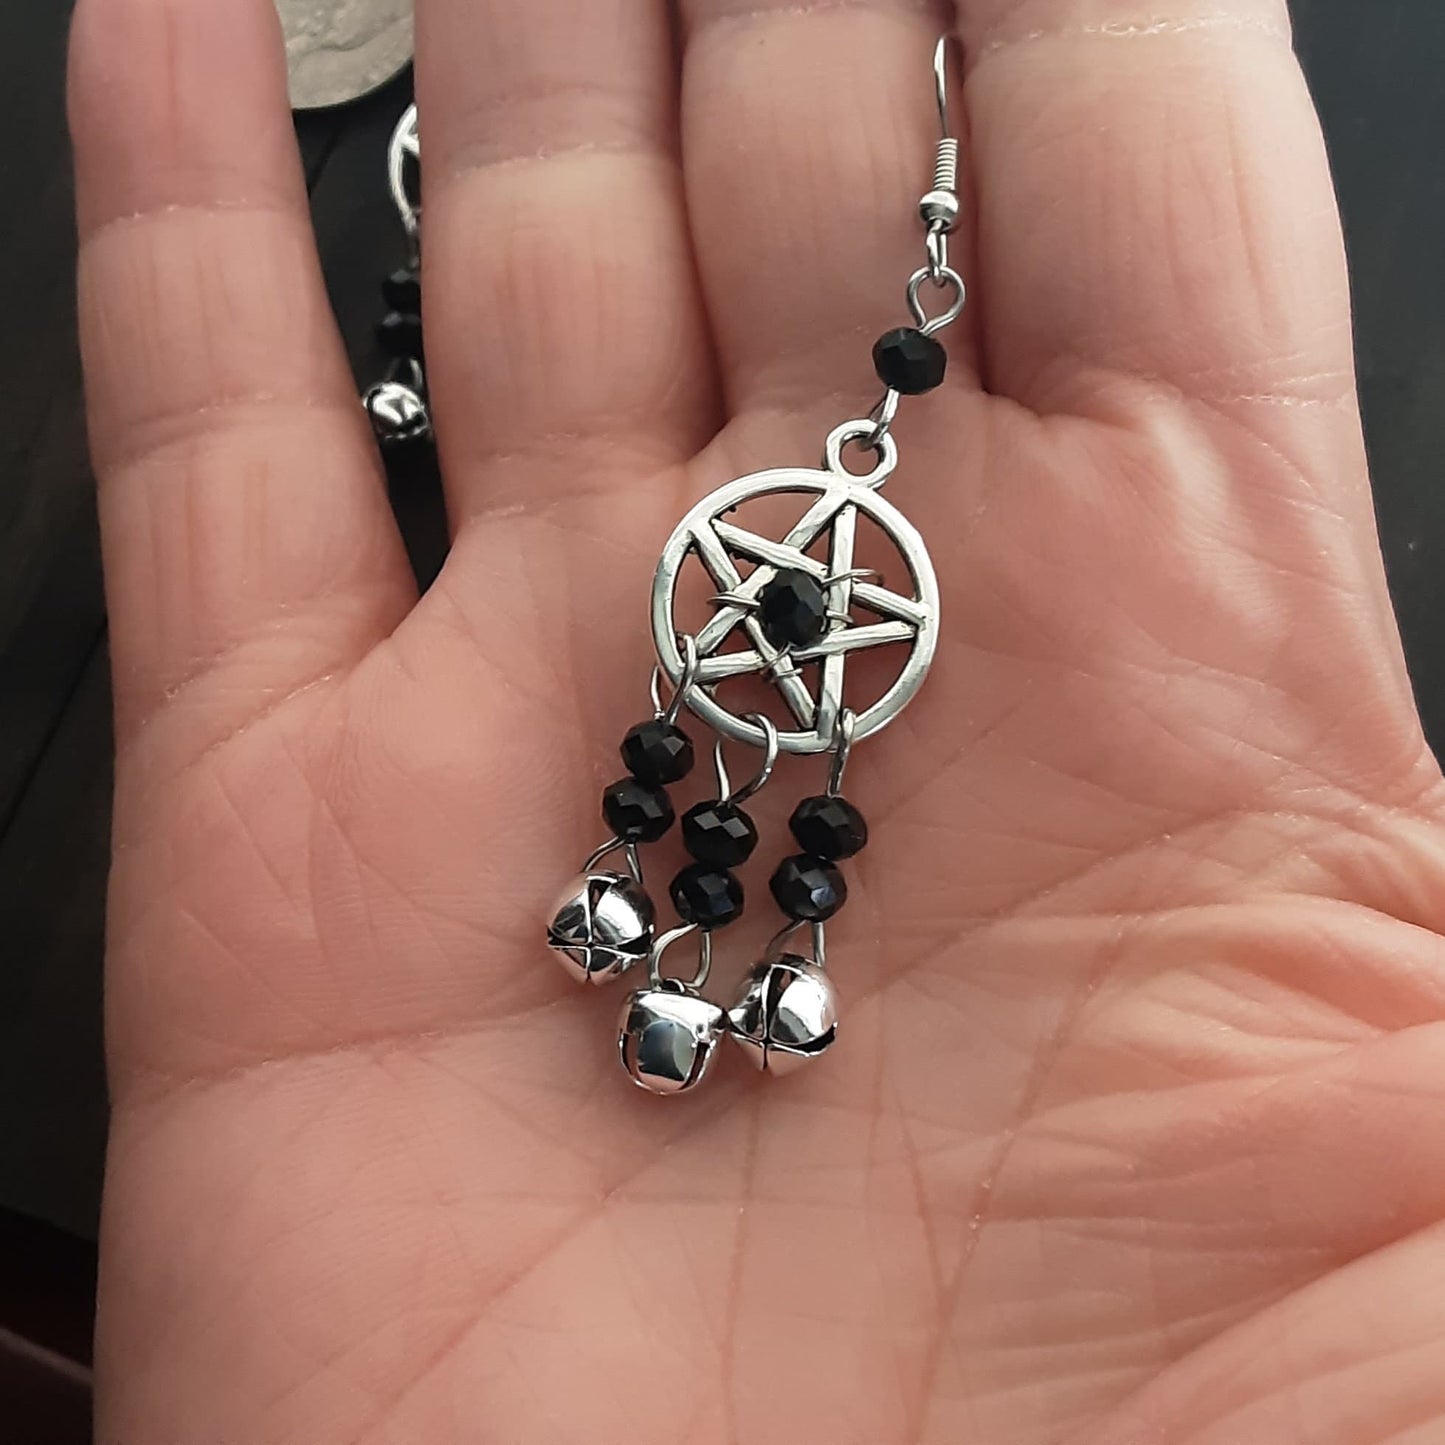 Witch bell earrings with pentacles and black crystals Sound cleansing Pagan jewelry